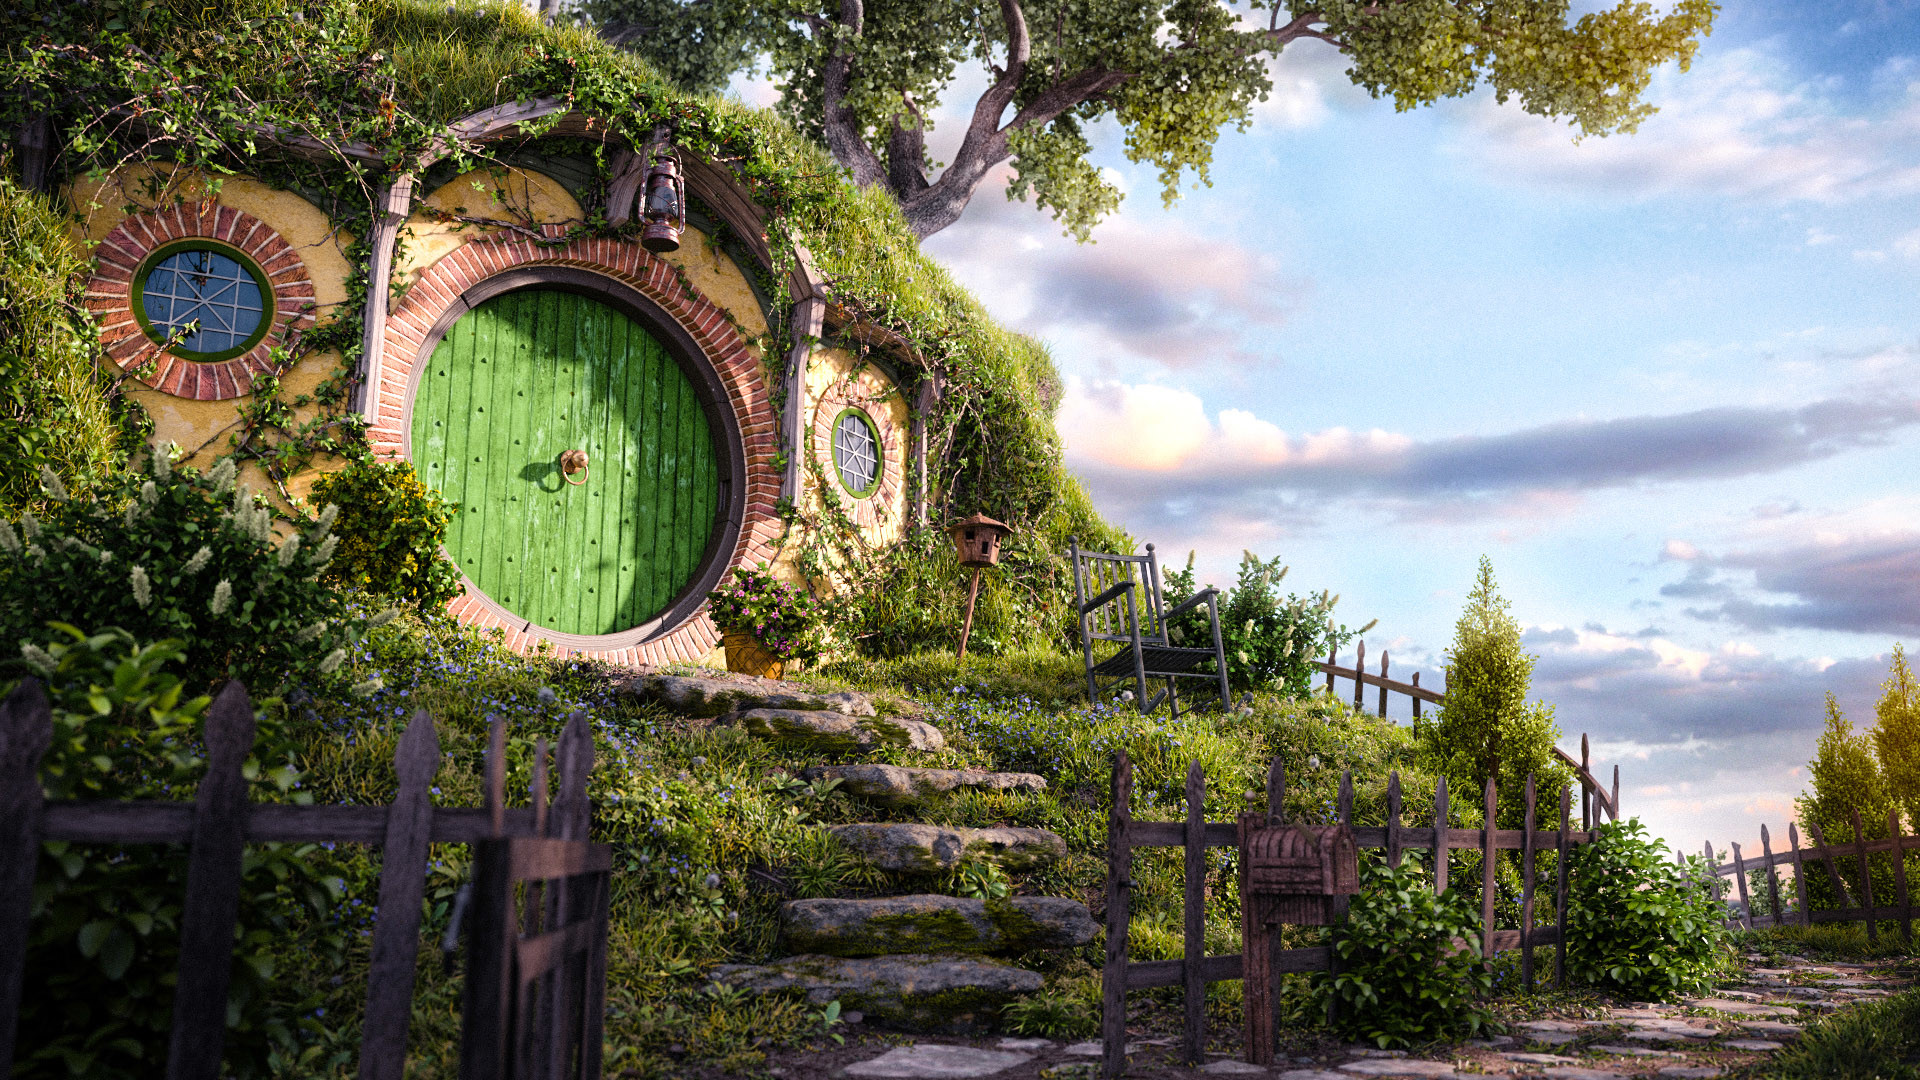 Bag End The Shire The Lord Of The Rings House Artwork Digital Art The Hobbit J R R Tolkien